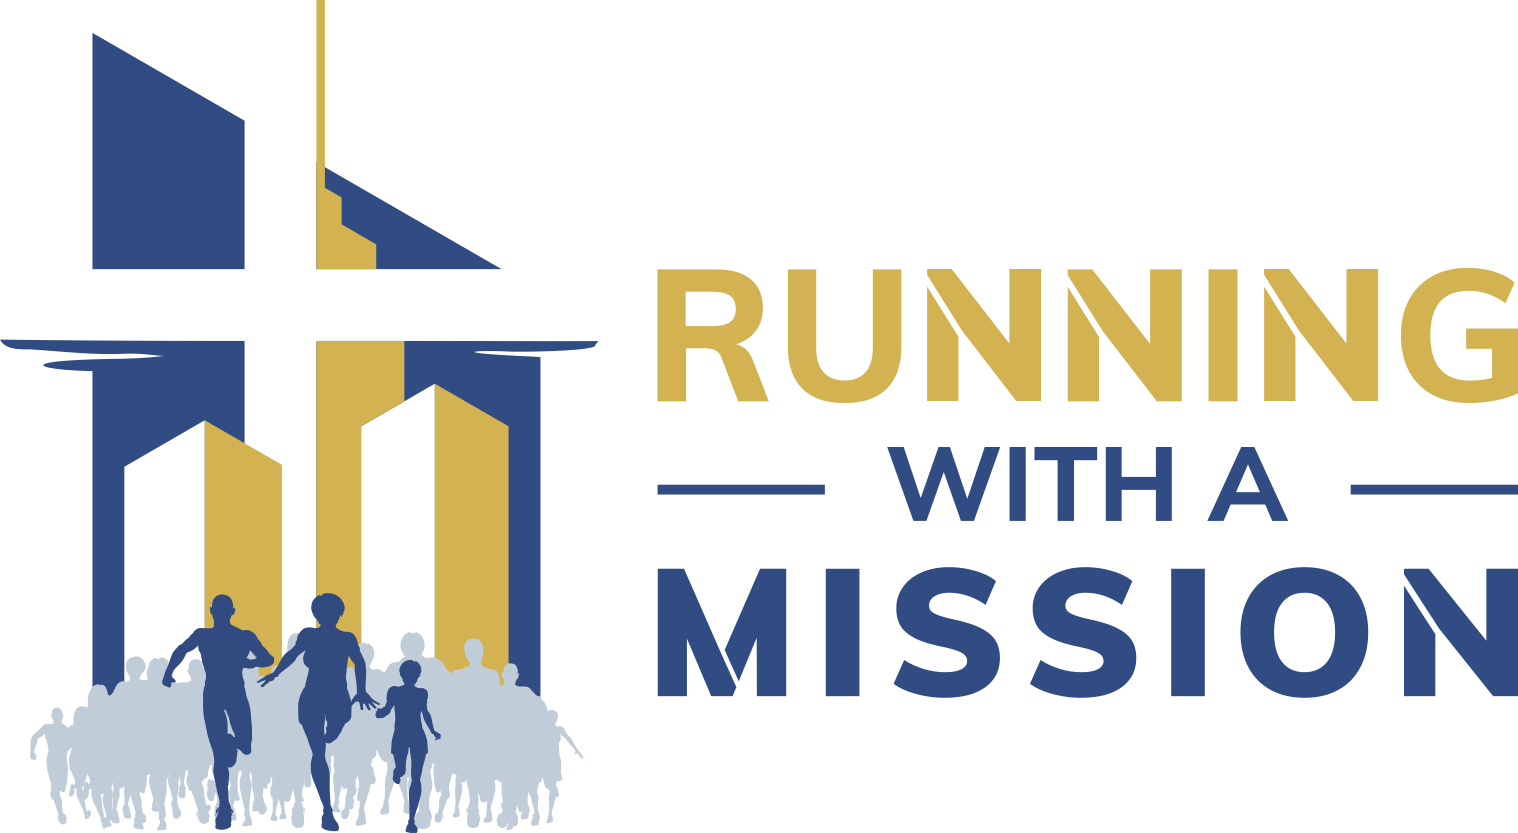 Go to the Running with a Mission 2022 landing page